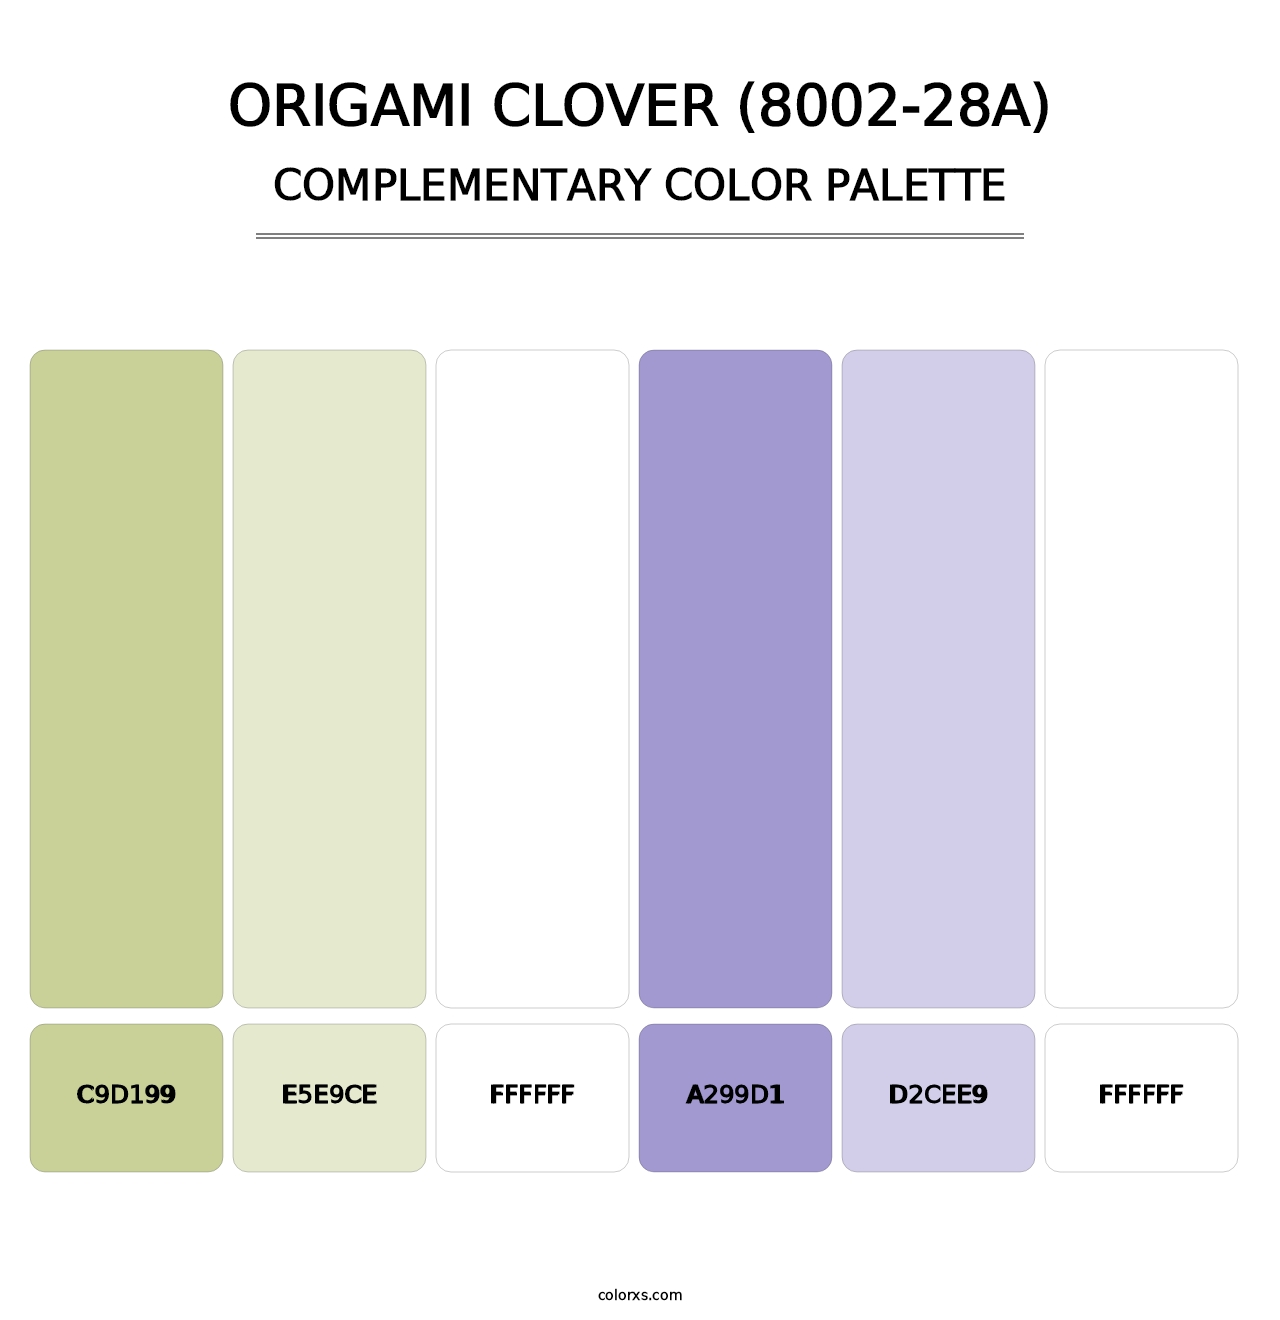 Origami Clover (8002-28A) - Complementary Color Palette